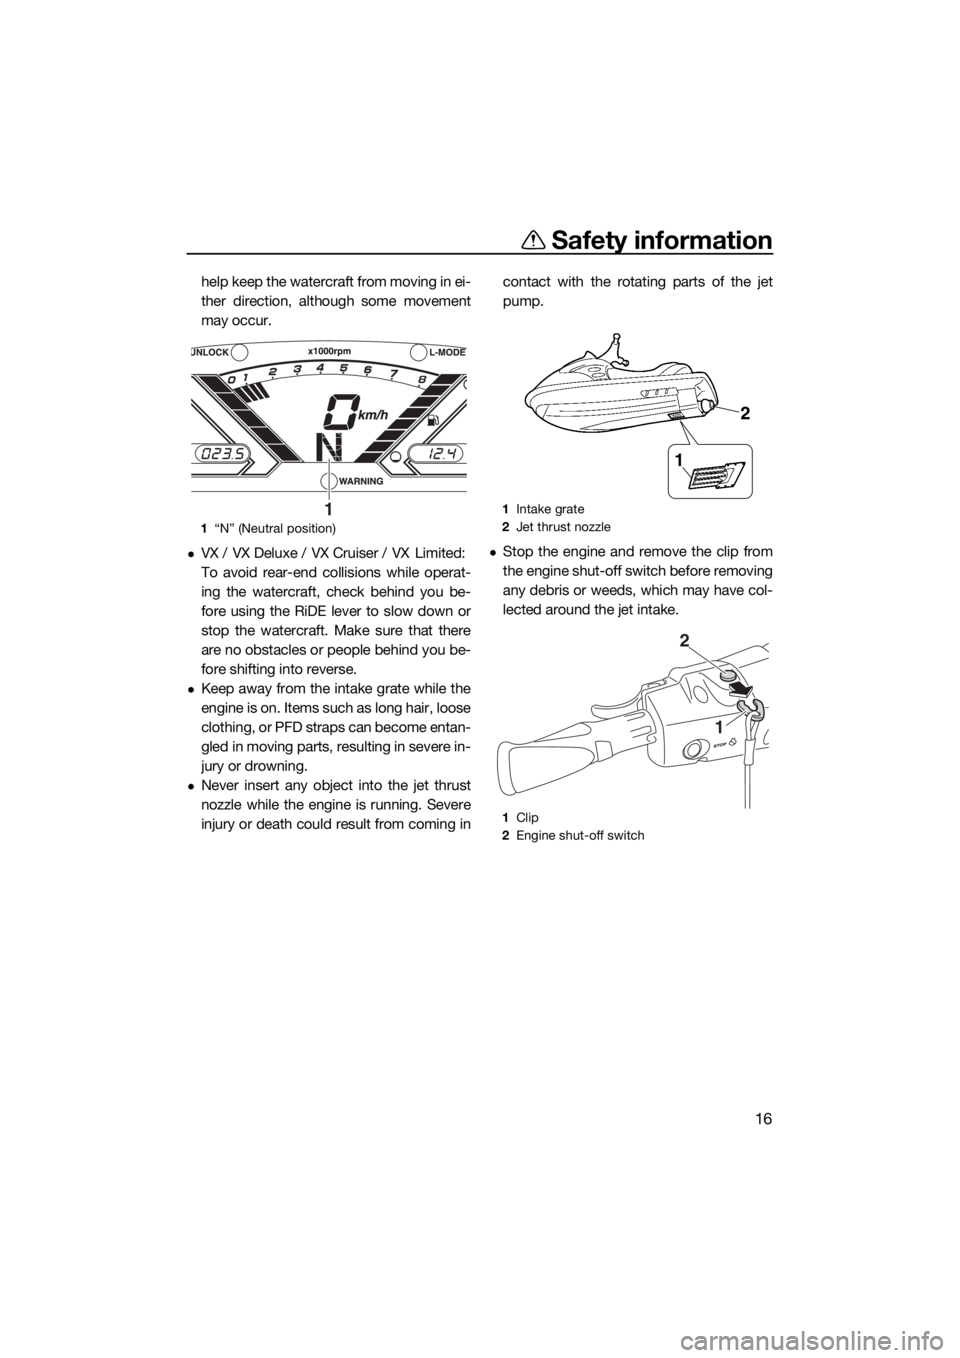 YAMAHA VX-C 2020 Owners Manual Safety information
16
help keep the watercraft from moving in ei-
ther direction, although some movement
may occur.
VX / VX Deluxe / VX Cruiser / VX Limited: 
To avoid rear-end collisions while ope